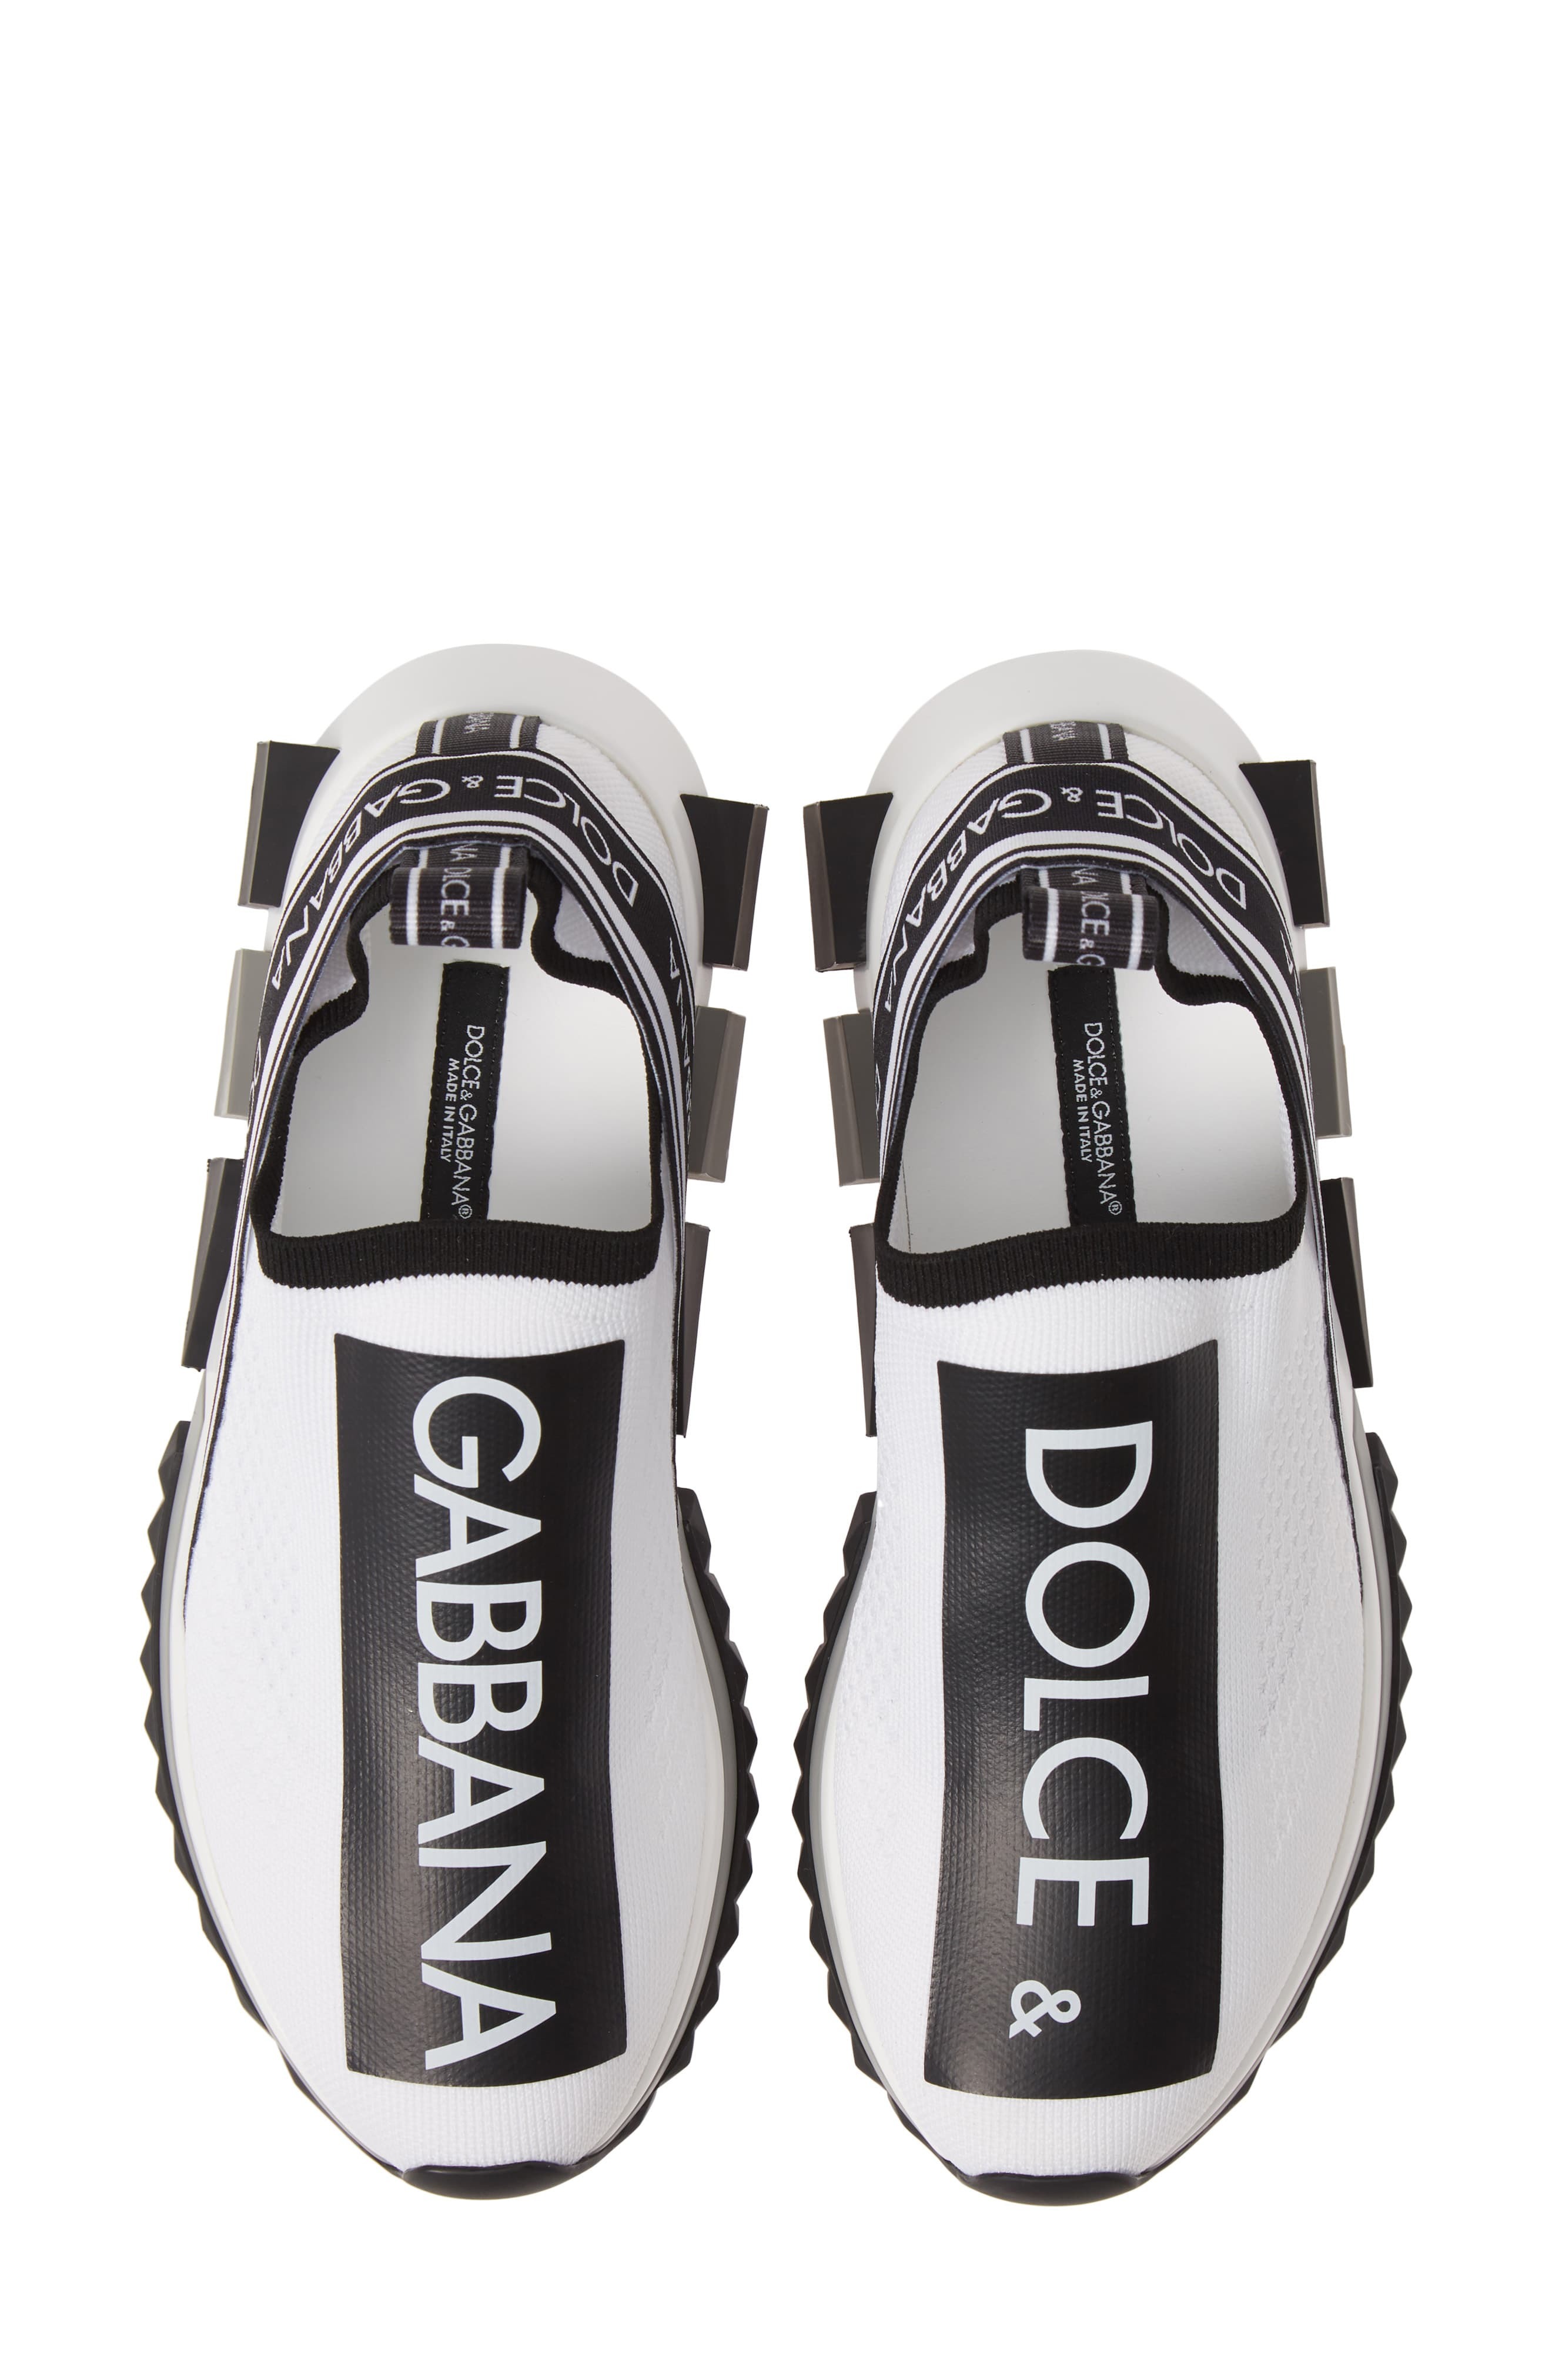 nordstrom dolce and gabbana